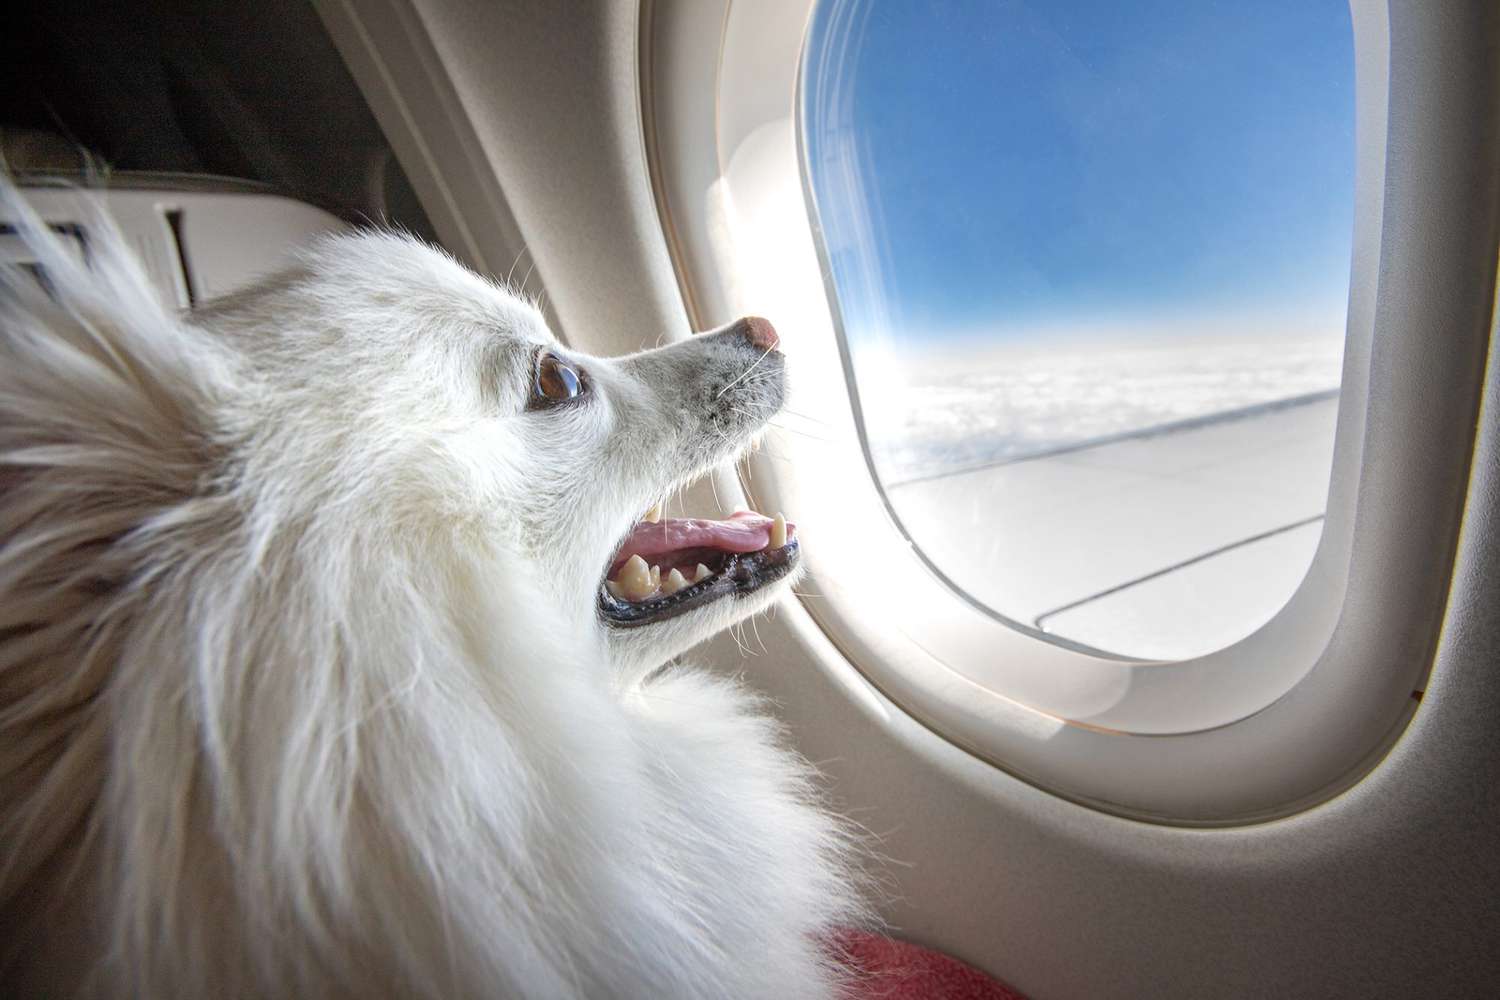 Flying with Your Dog: Rules, Safety Tips, and Best Breeds for Air Travel